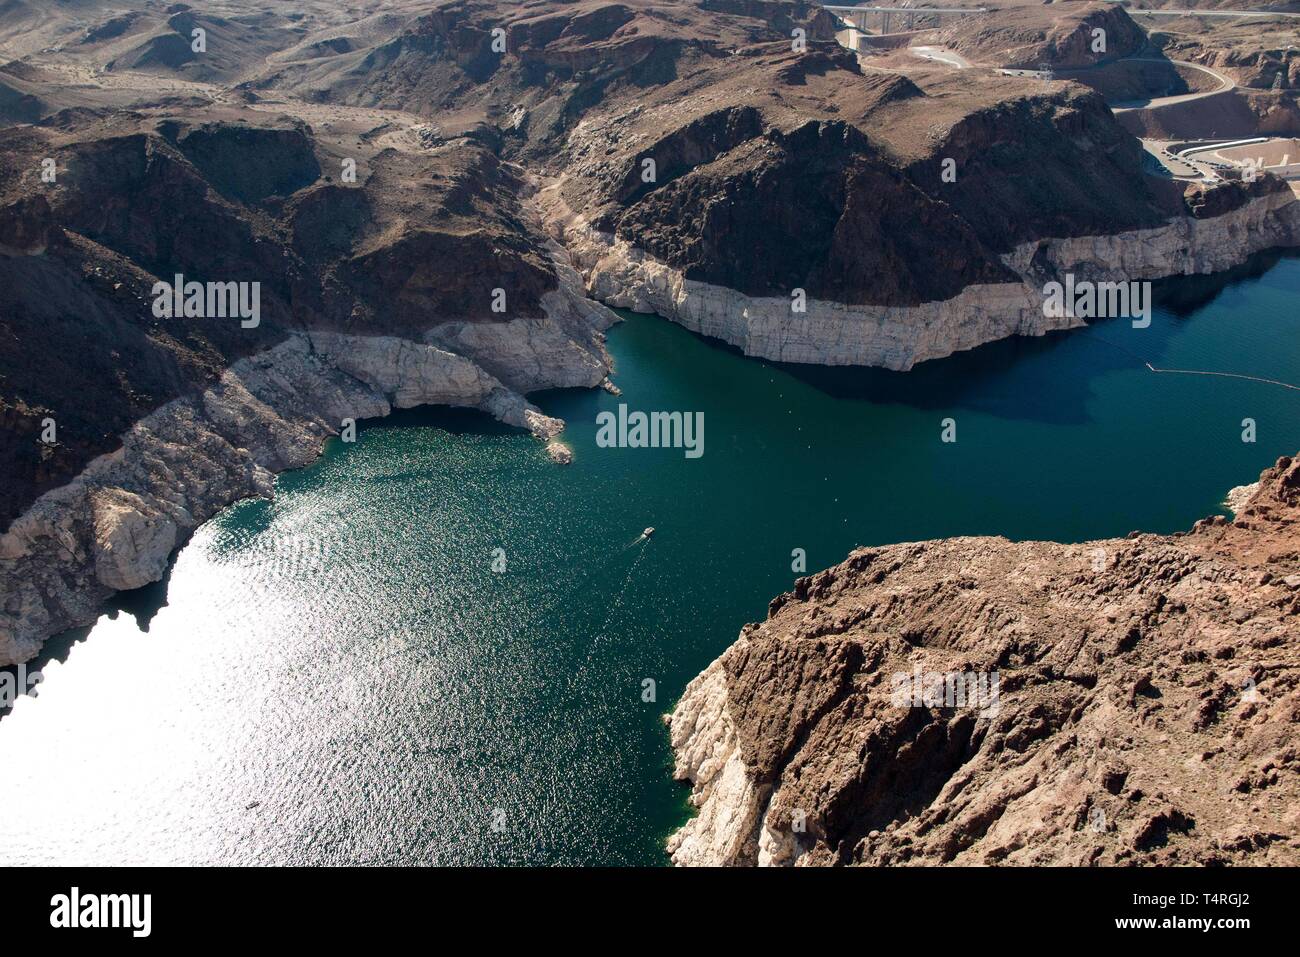 Boulder City, Nevada, USA. 23rd Oct, 2015. Low waters of Lake Mead seen from above in this aerial view via helicopter. Years of unrelenting drought are straining a large reservoir of water between Nevada and Arizona. Lake Mead's water level has dropped by about 120 feet (37 meters) from where the water reached 15 years ago, on July 6, 2000. Lake Mead is no stranger to droughts. The man-made lake hit lower-than-average water levels in the mid-1950s and mid-1960s, and the current depletion is part of a decade-long trend. Lake Mead's current low level hasn't been recorded since the 1930s, when t Stock Photo